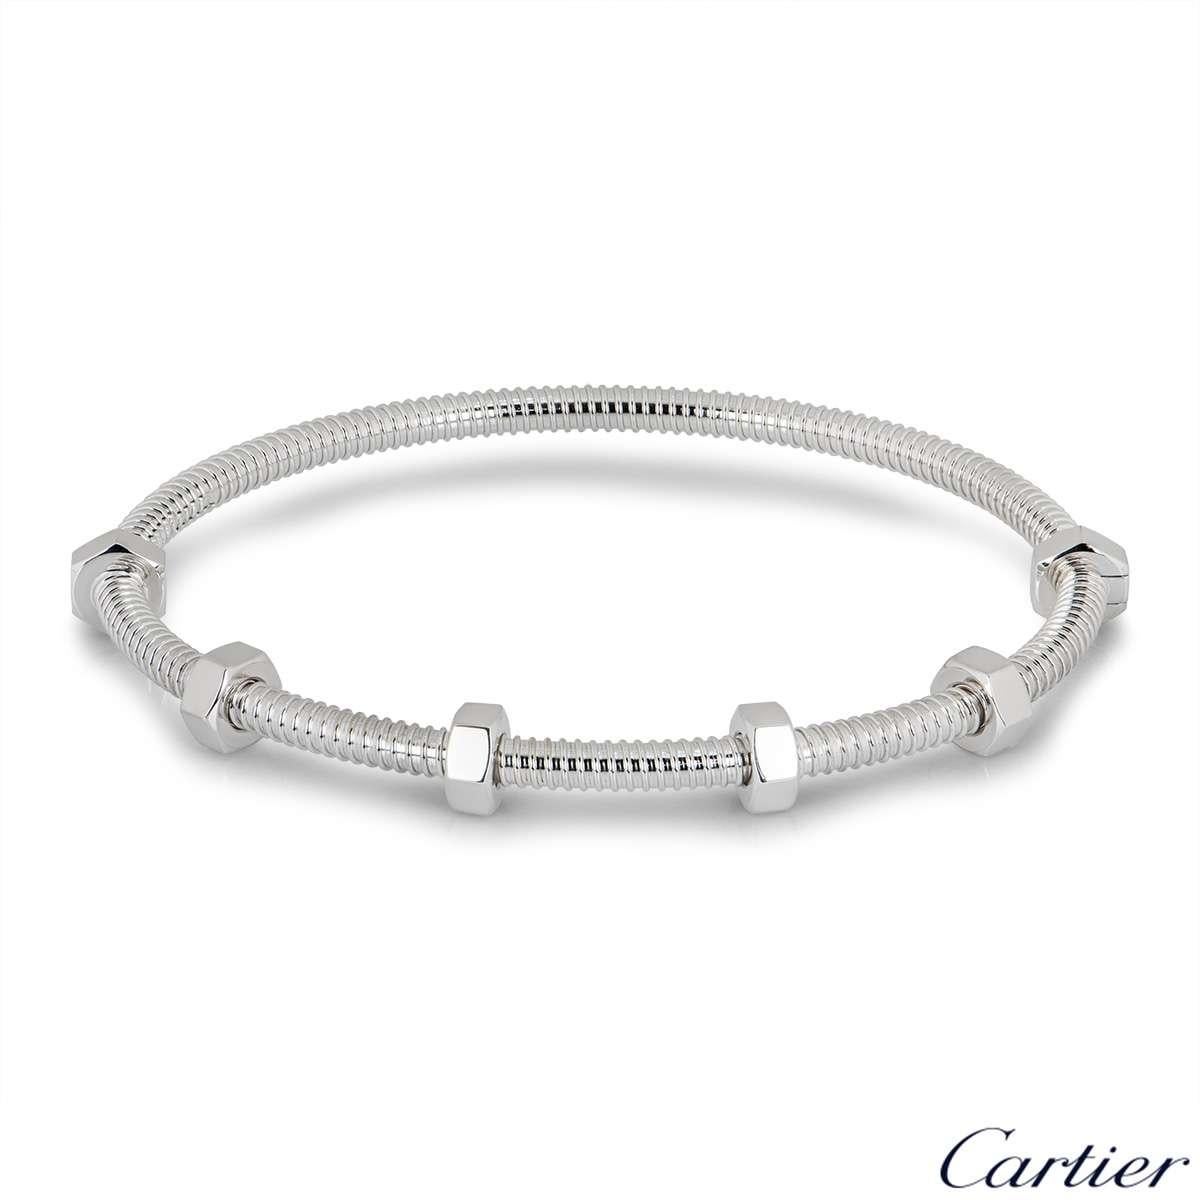 A stunning 18k white gold bracelet by Cartier from the Ecrou De Cartier collection. The bracelet has a threaded design which features 6 bolts with 4 swivelling freely along one side of the bracelet. The bracelet is a size 16 and has a gross weight